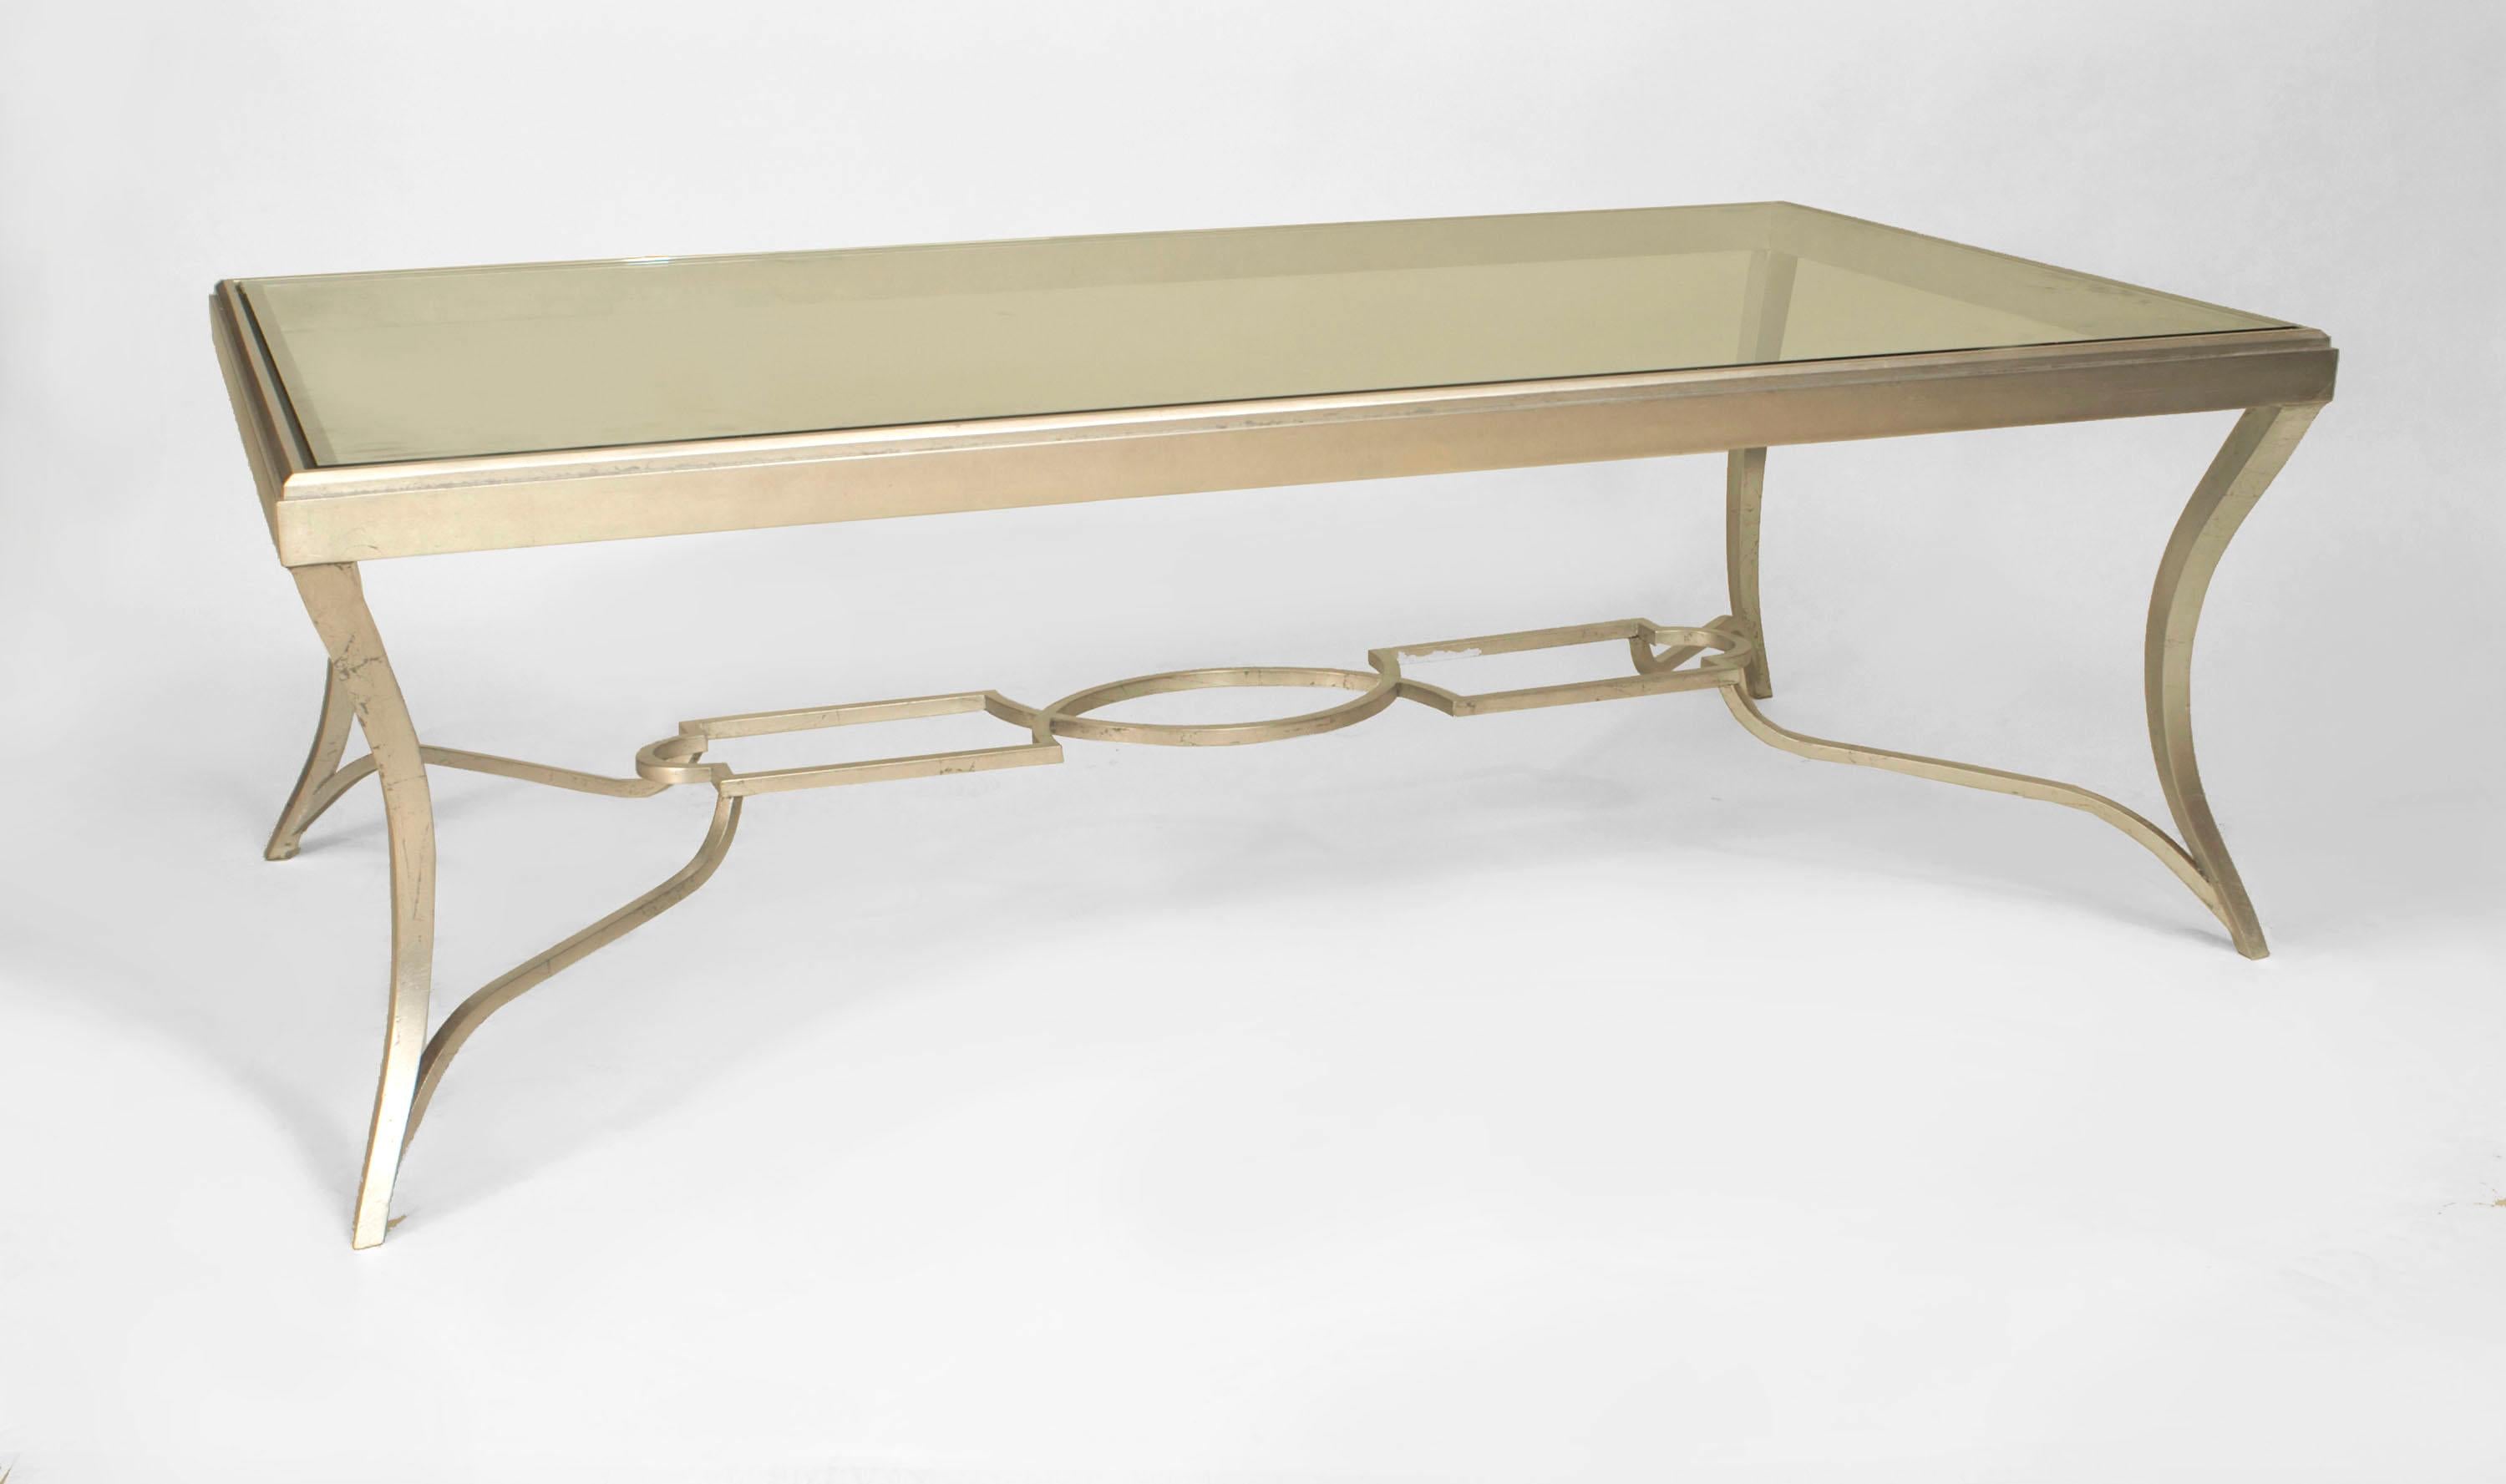 Art Moderne-style rectangular coffee table with silver patinated bronze base, four cabriole legs, and an openwork stretcher with an inset glass top.
